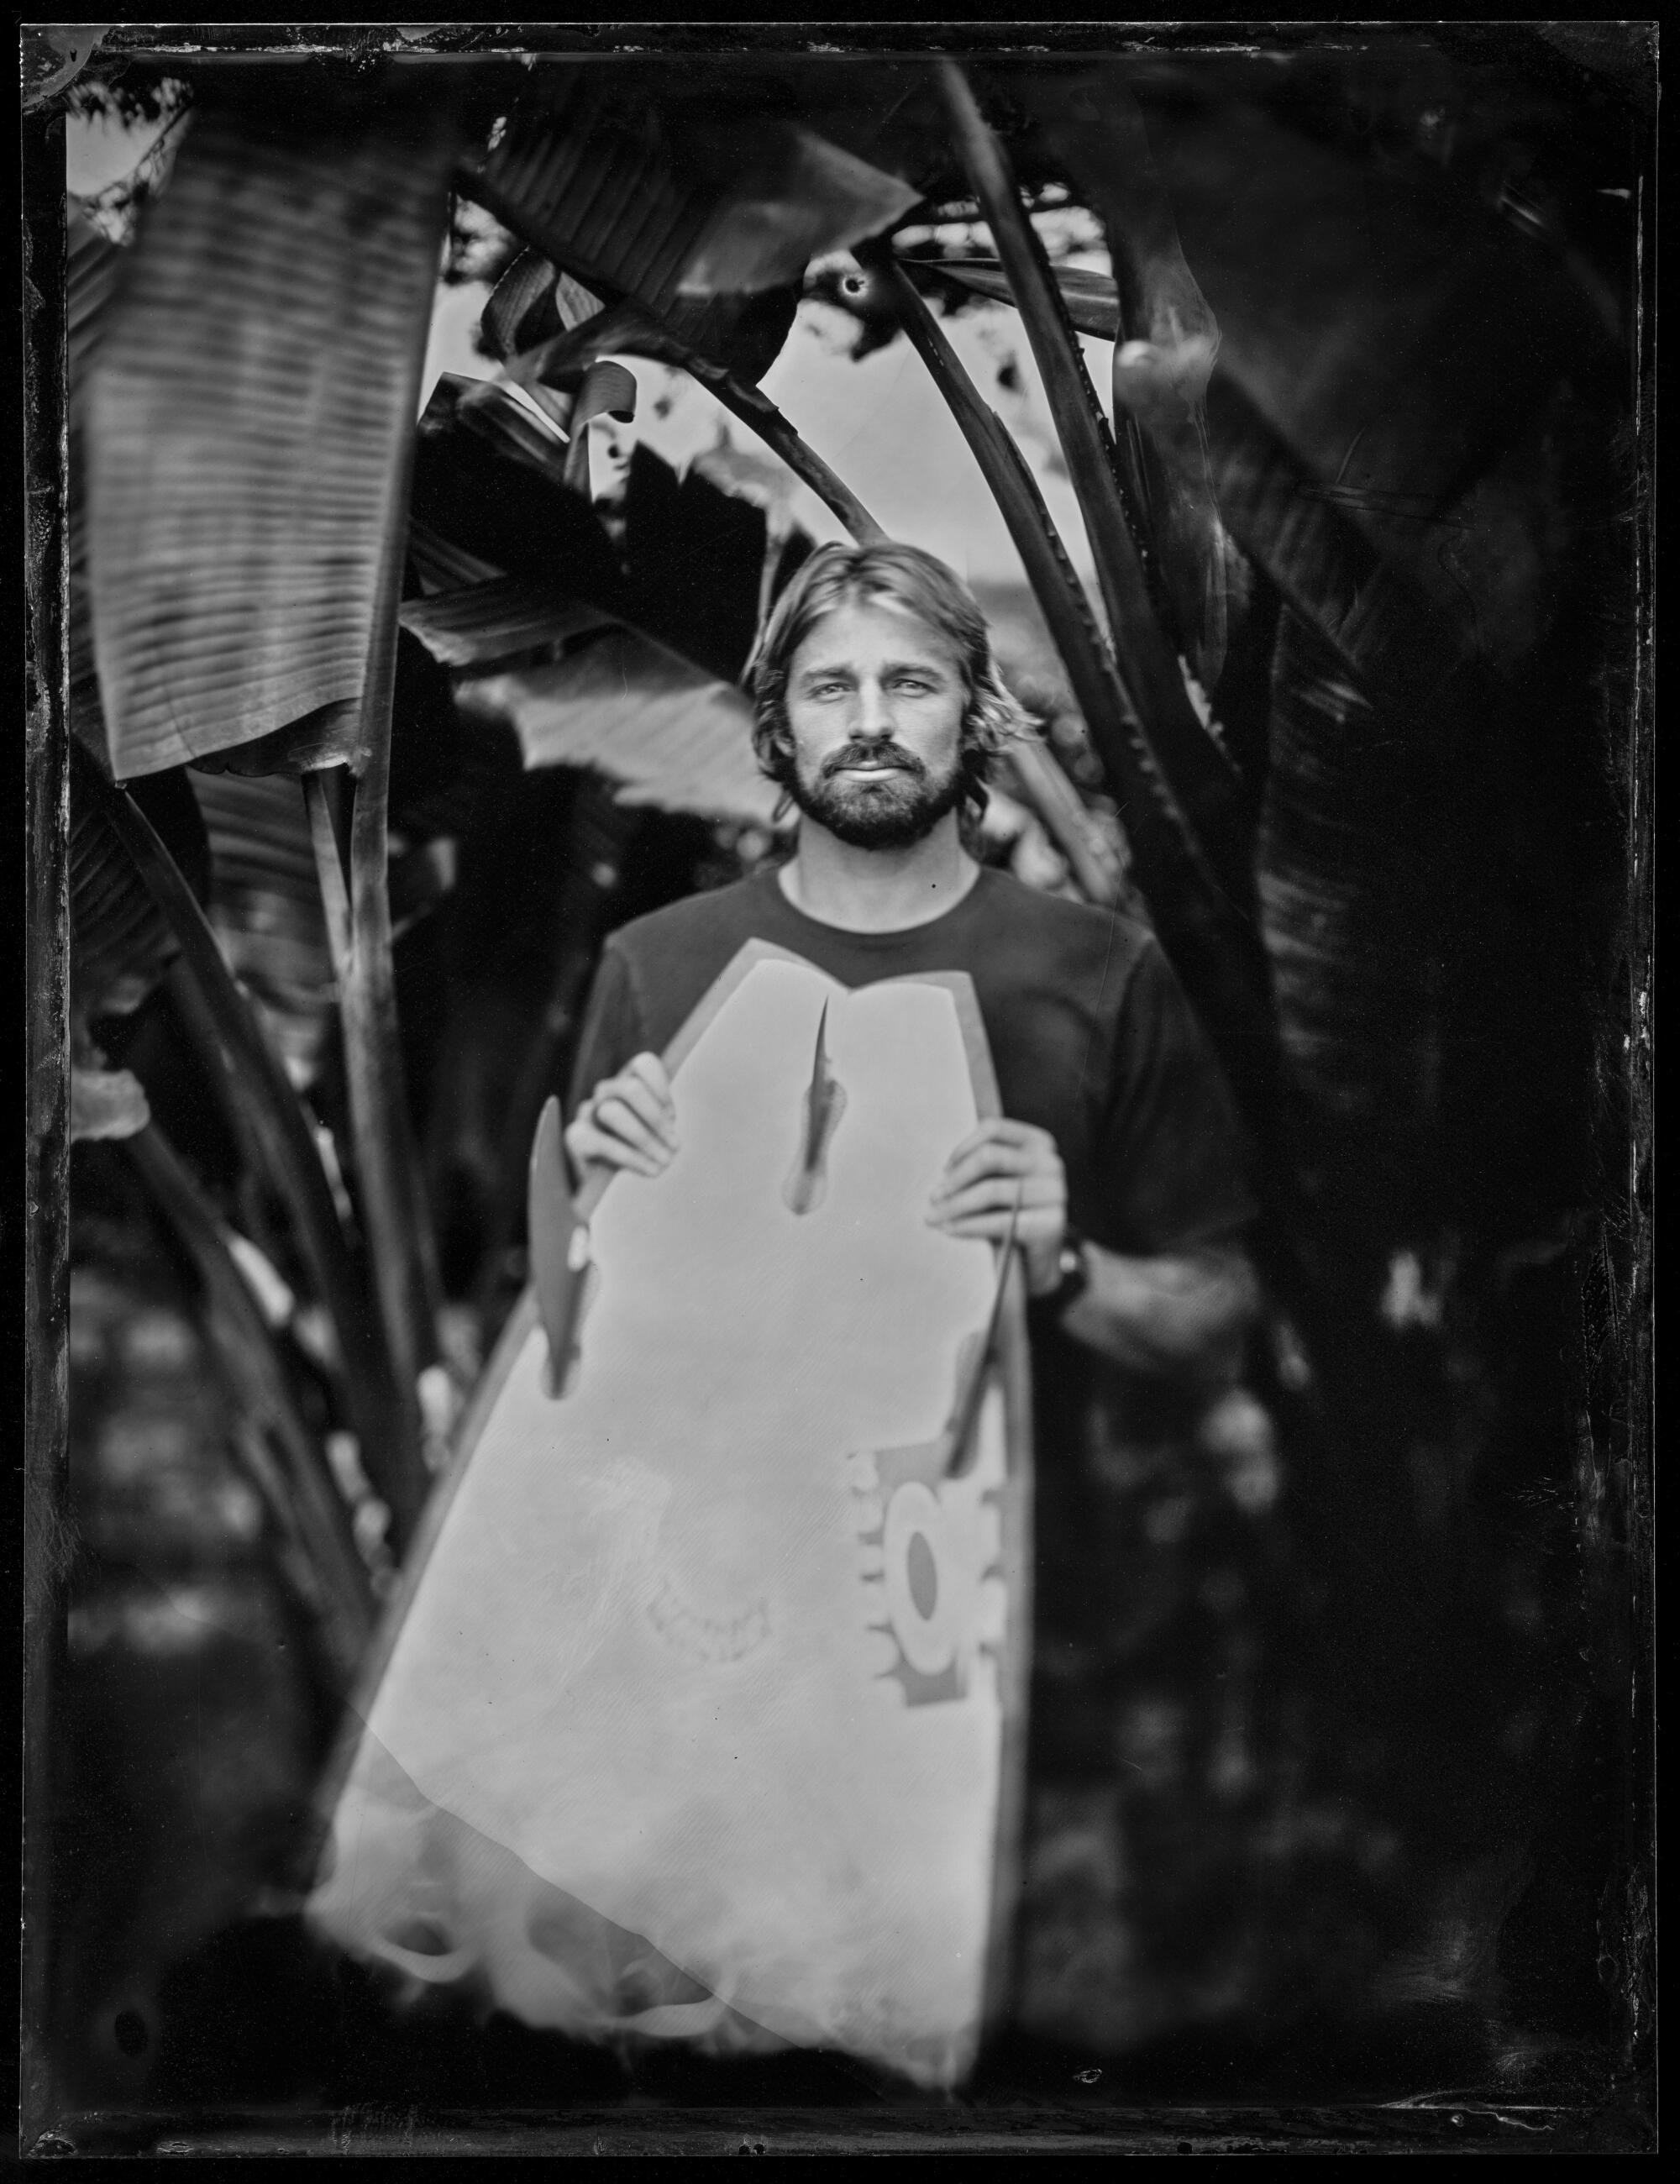 Kolohe Andino, one of the top-ranked surfers in the U.S., is seen in a tintype photograph